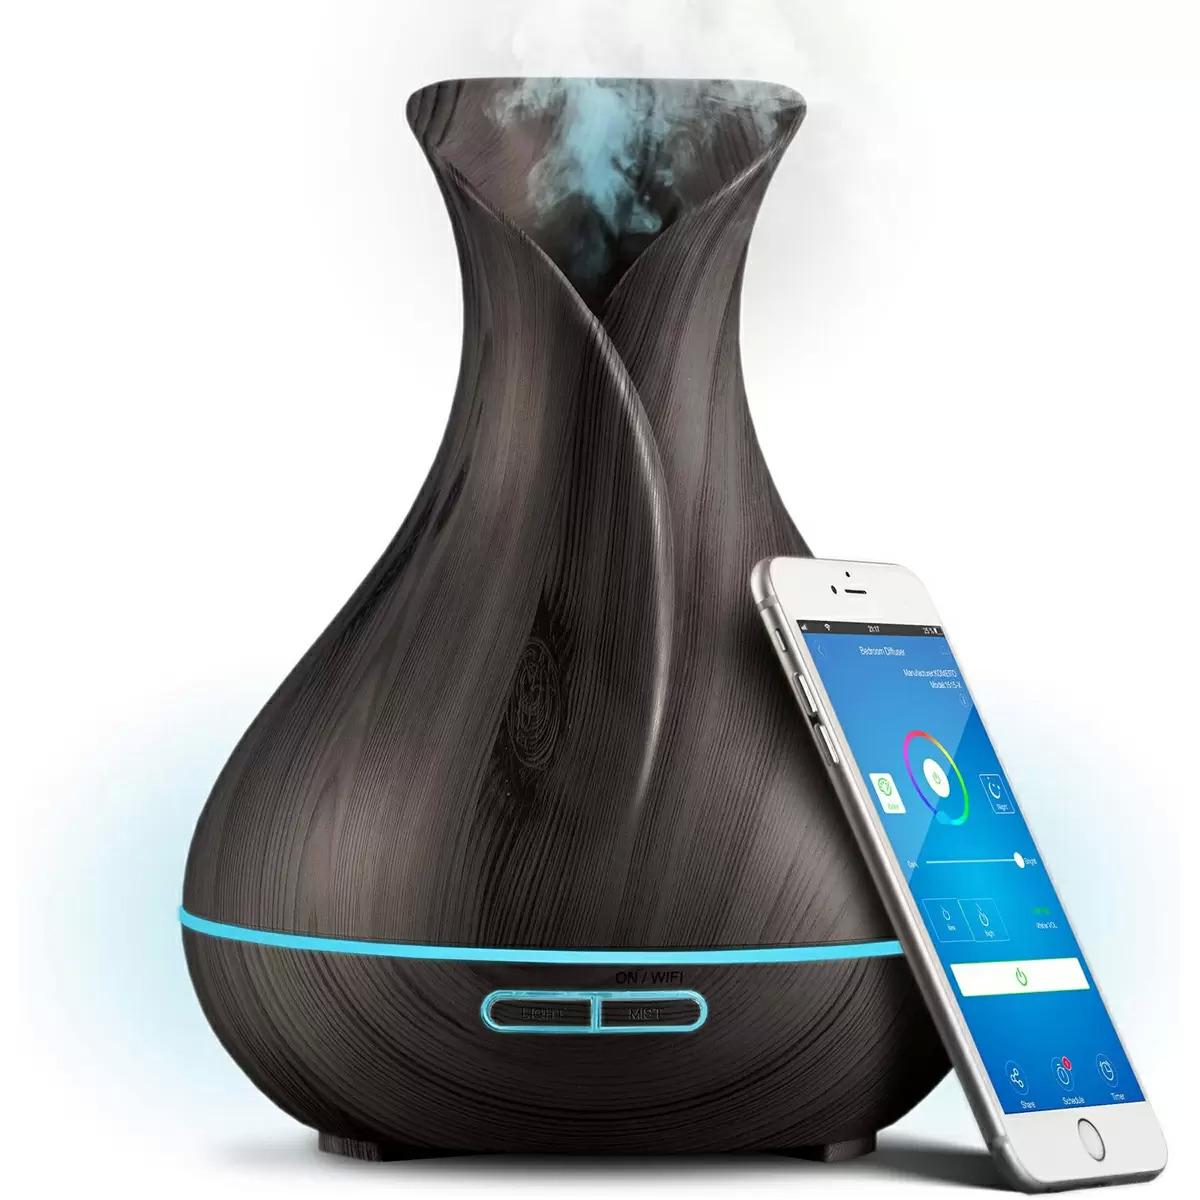 Smart WiFi Wireless Essential Oil Aromatherapy Humidifier for $25.56 Shipped